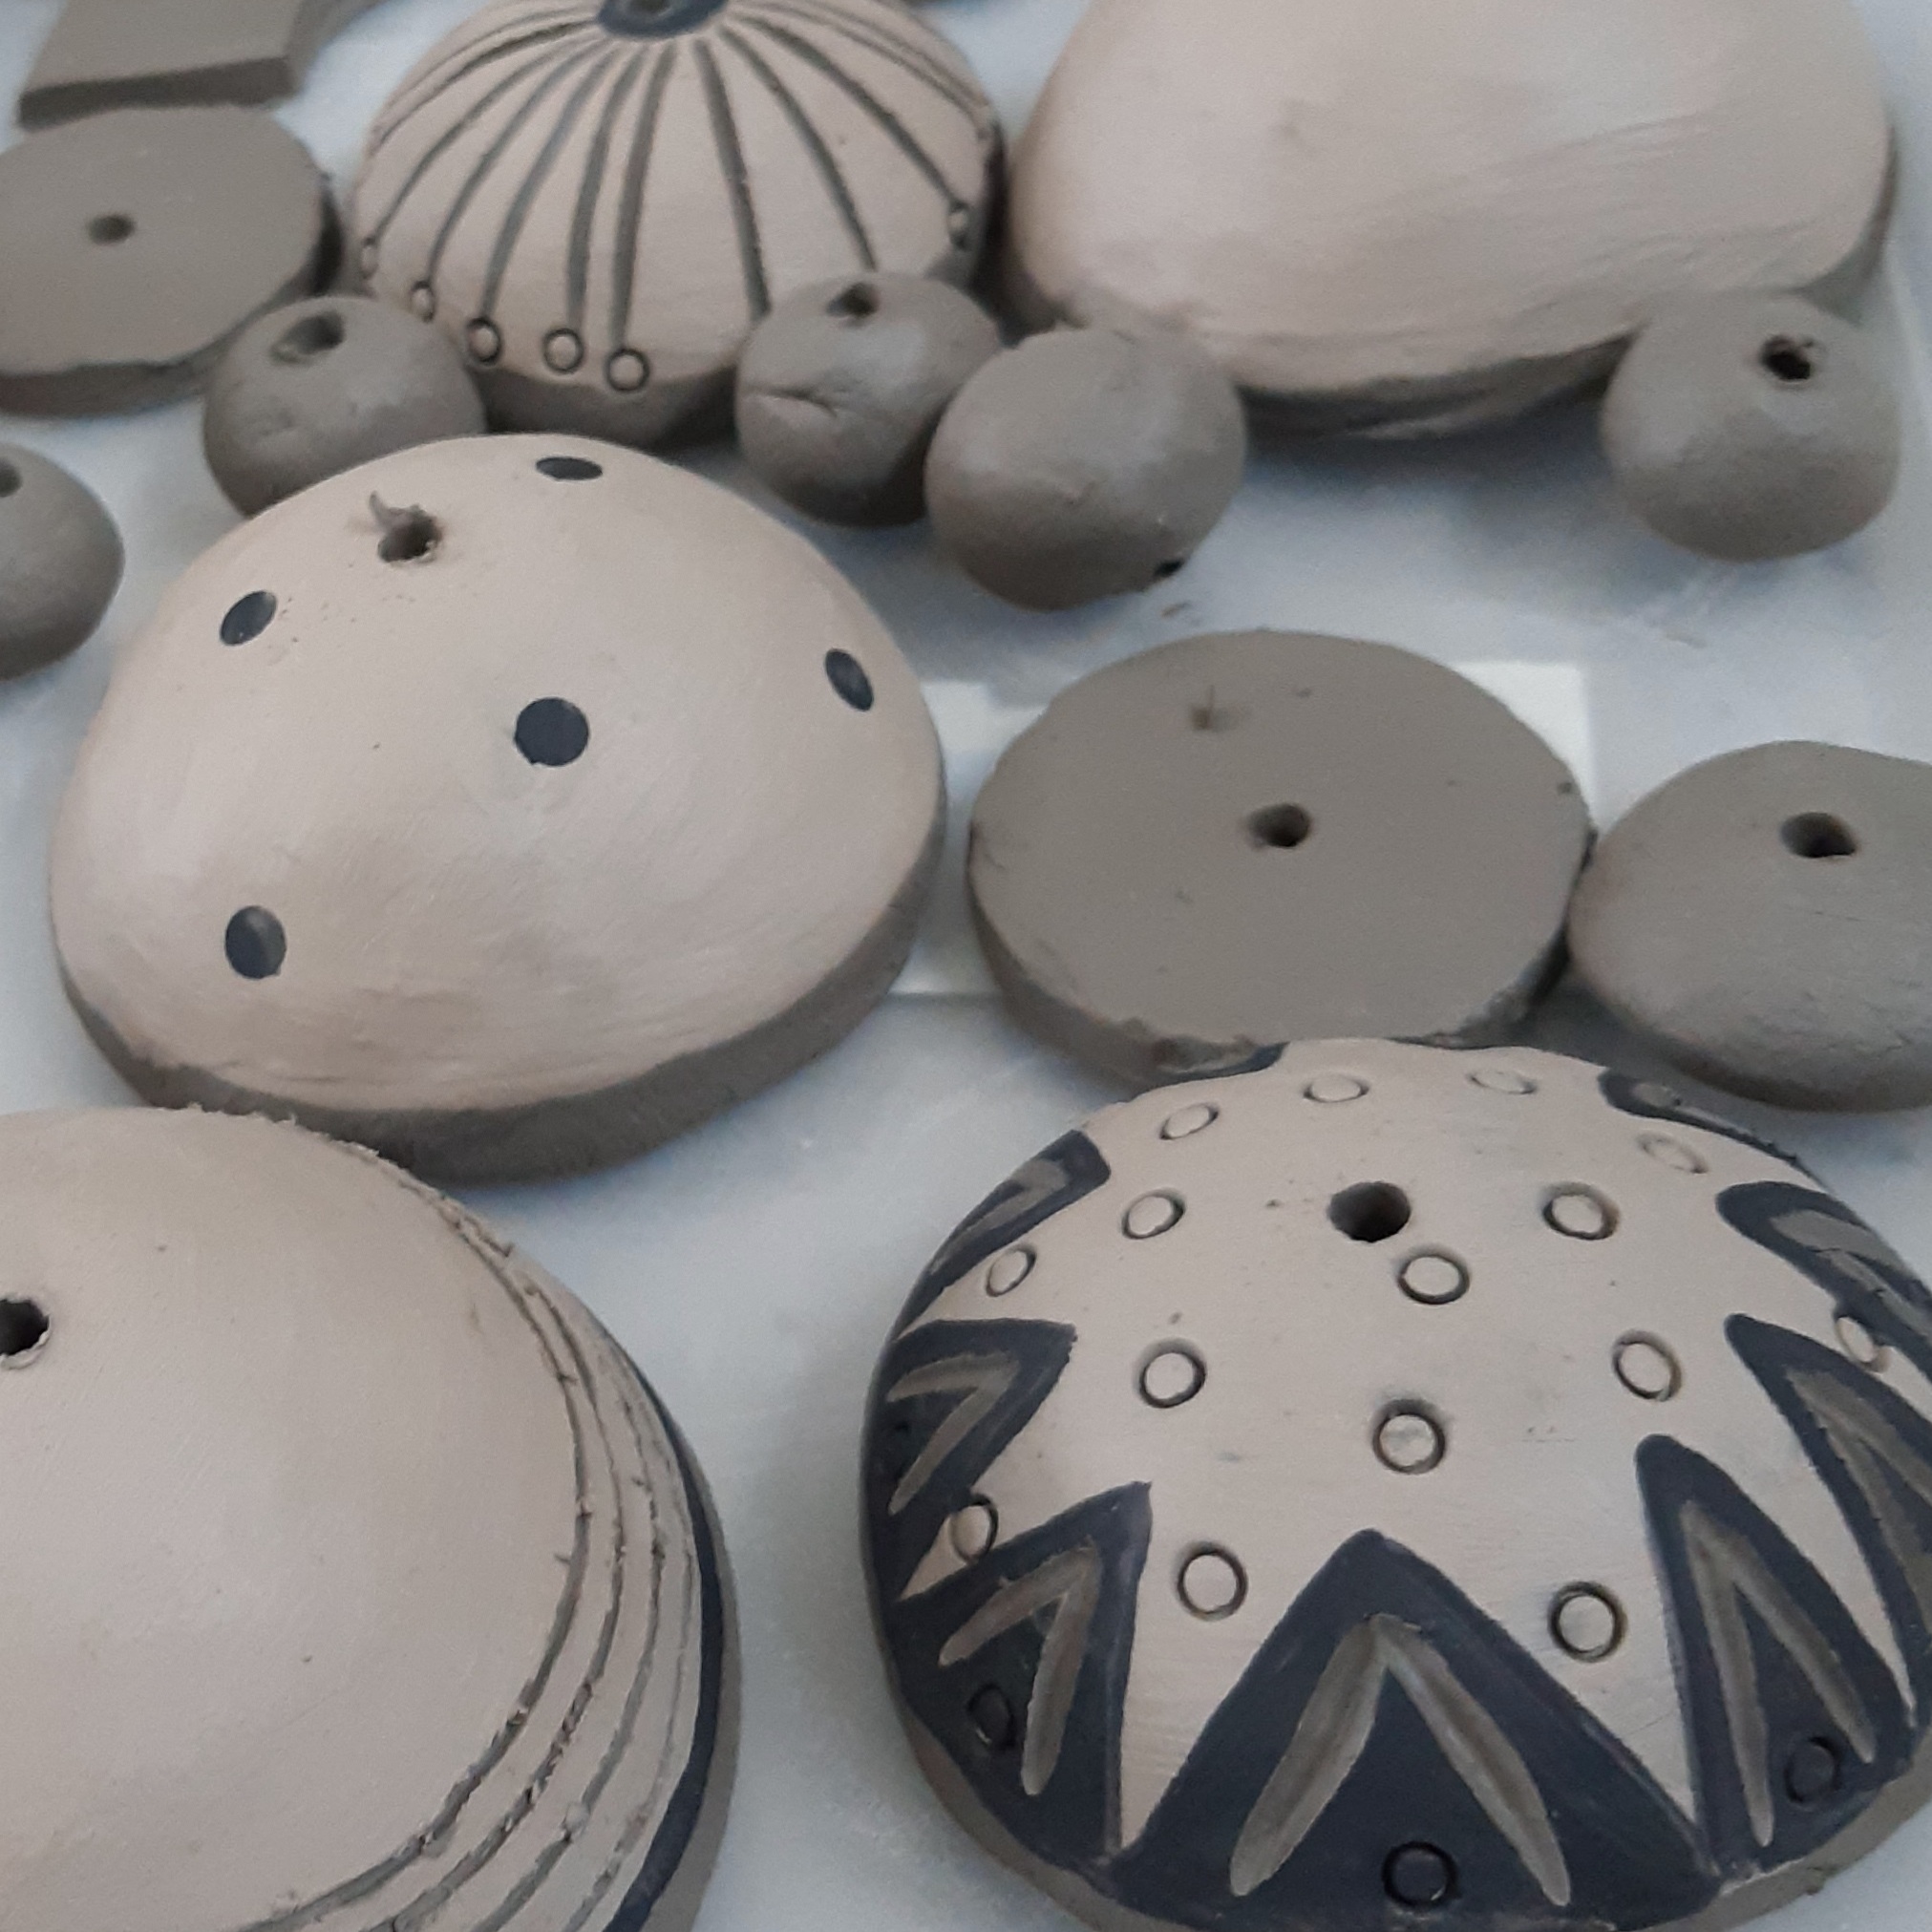 a selection of clay shapes created on a pottery course with different patterns and textures